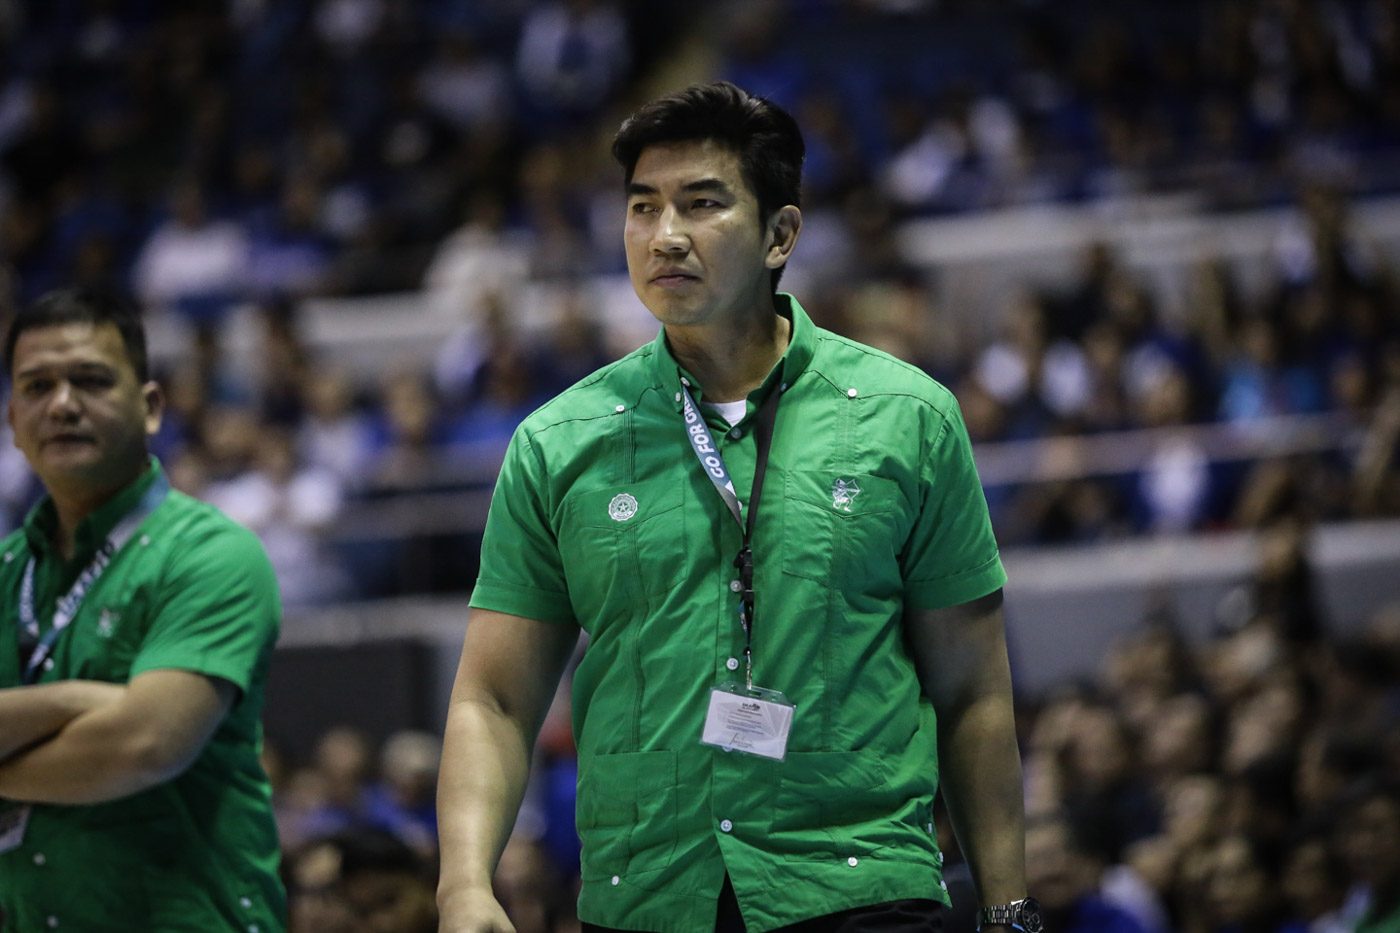 TACTICIAN. De La Salle coach Aldin Ayo made sure the Green Archers kept their composure when they trailed by as much as 21 in the early going. Photo by Josh Albelda/Rappler 